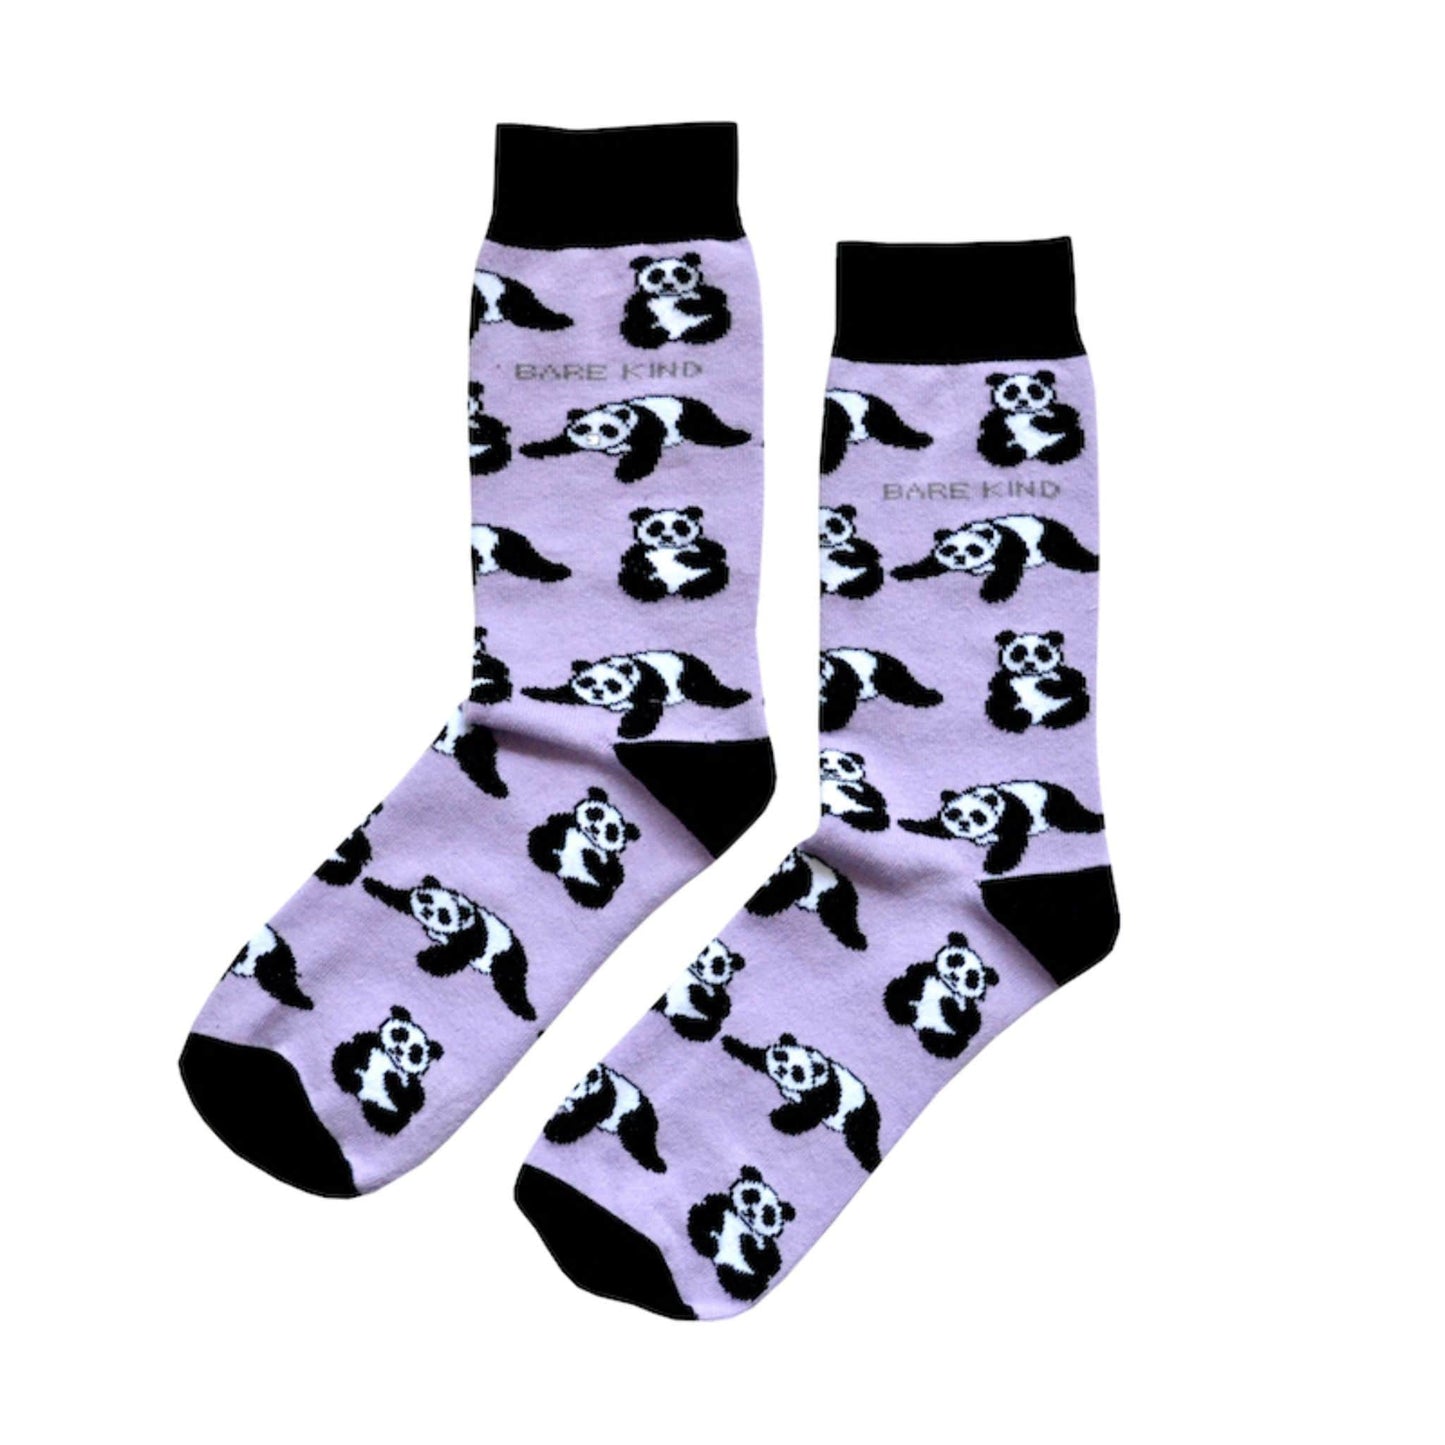 Socks Supporting Pandas - Sustainable Socks in 2 Adult Sizes - soft and high quality bamboo socks